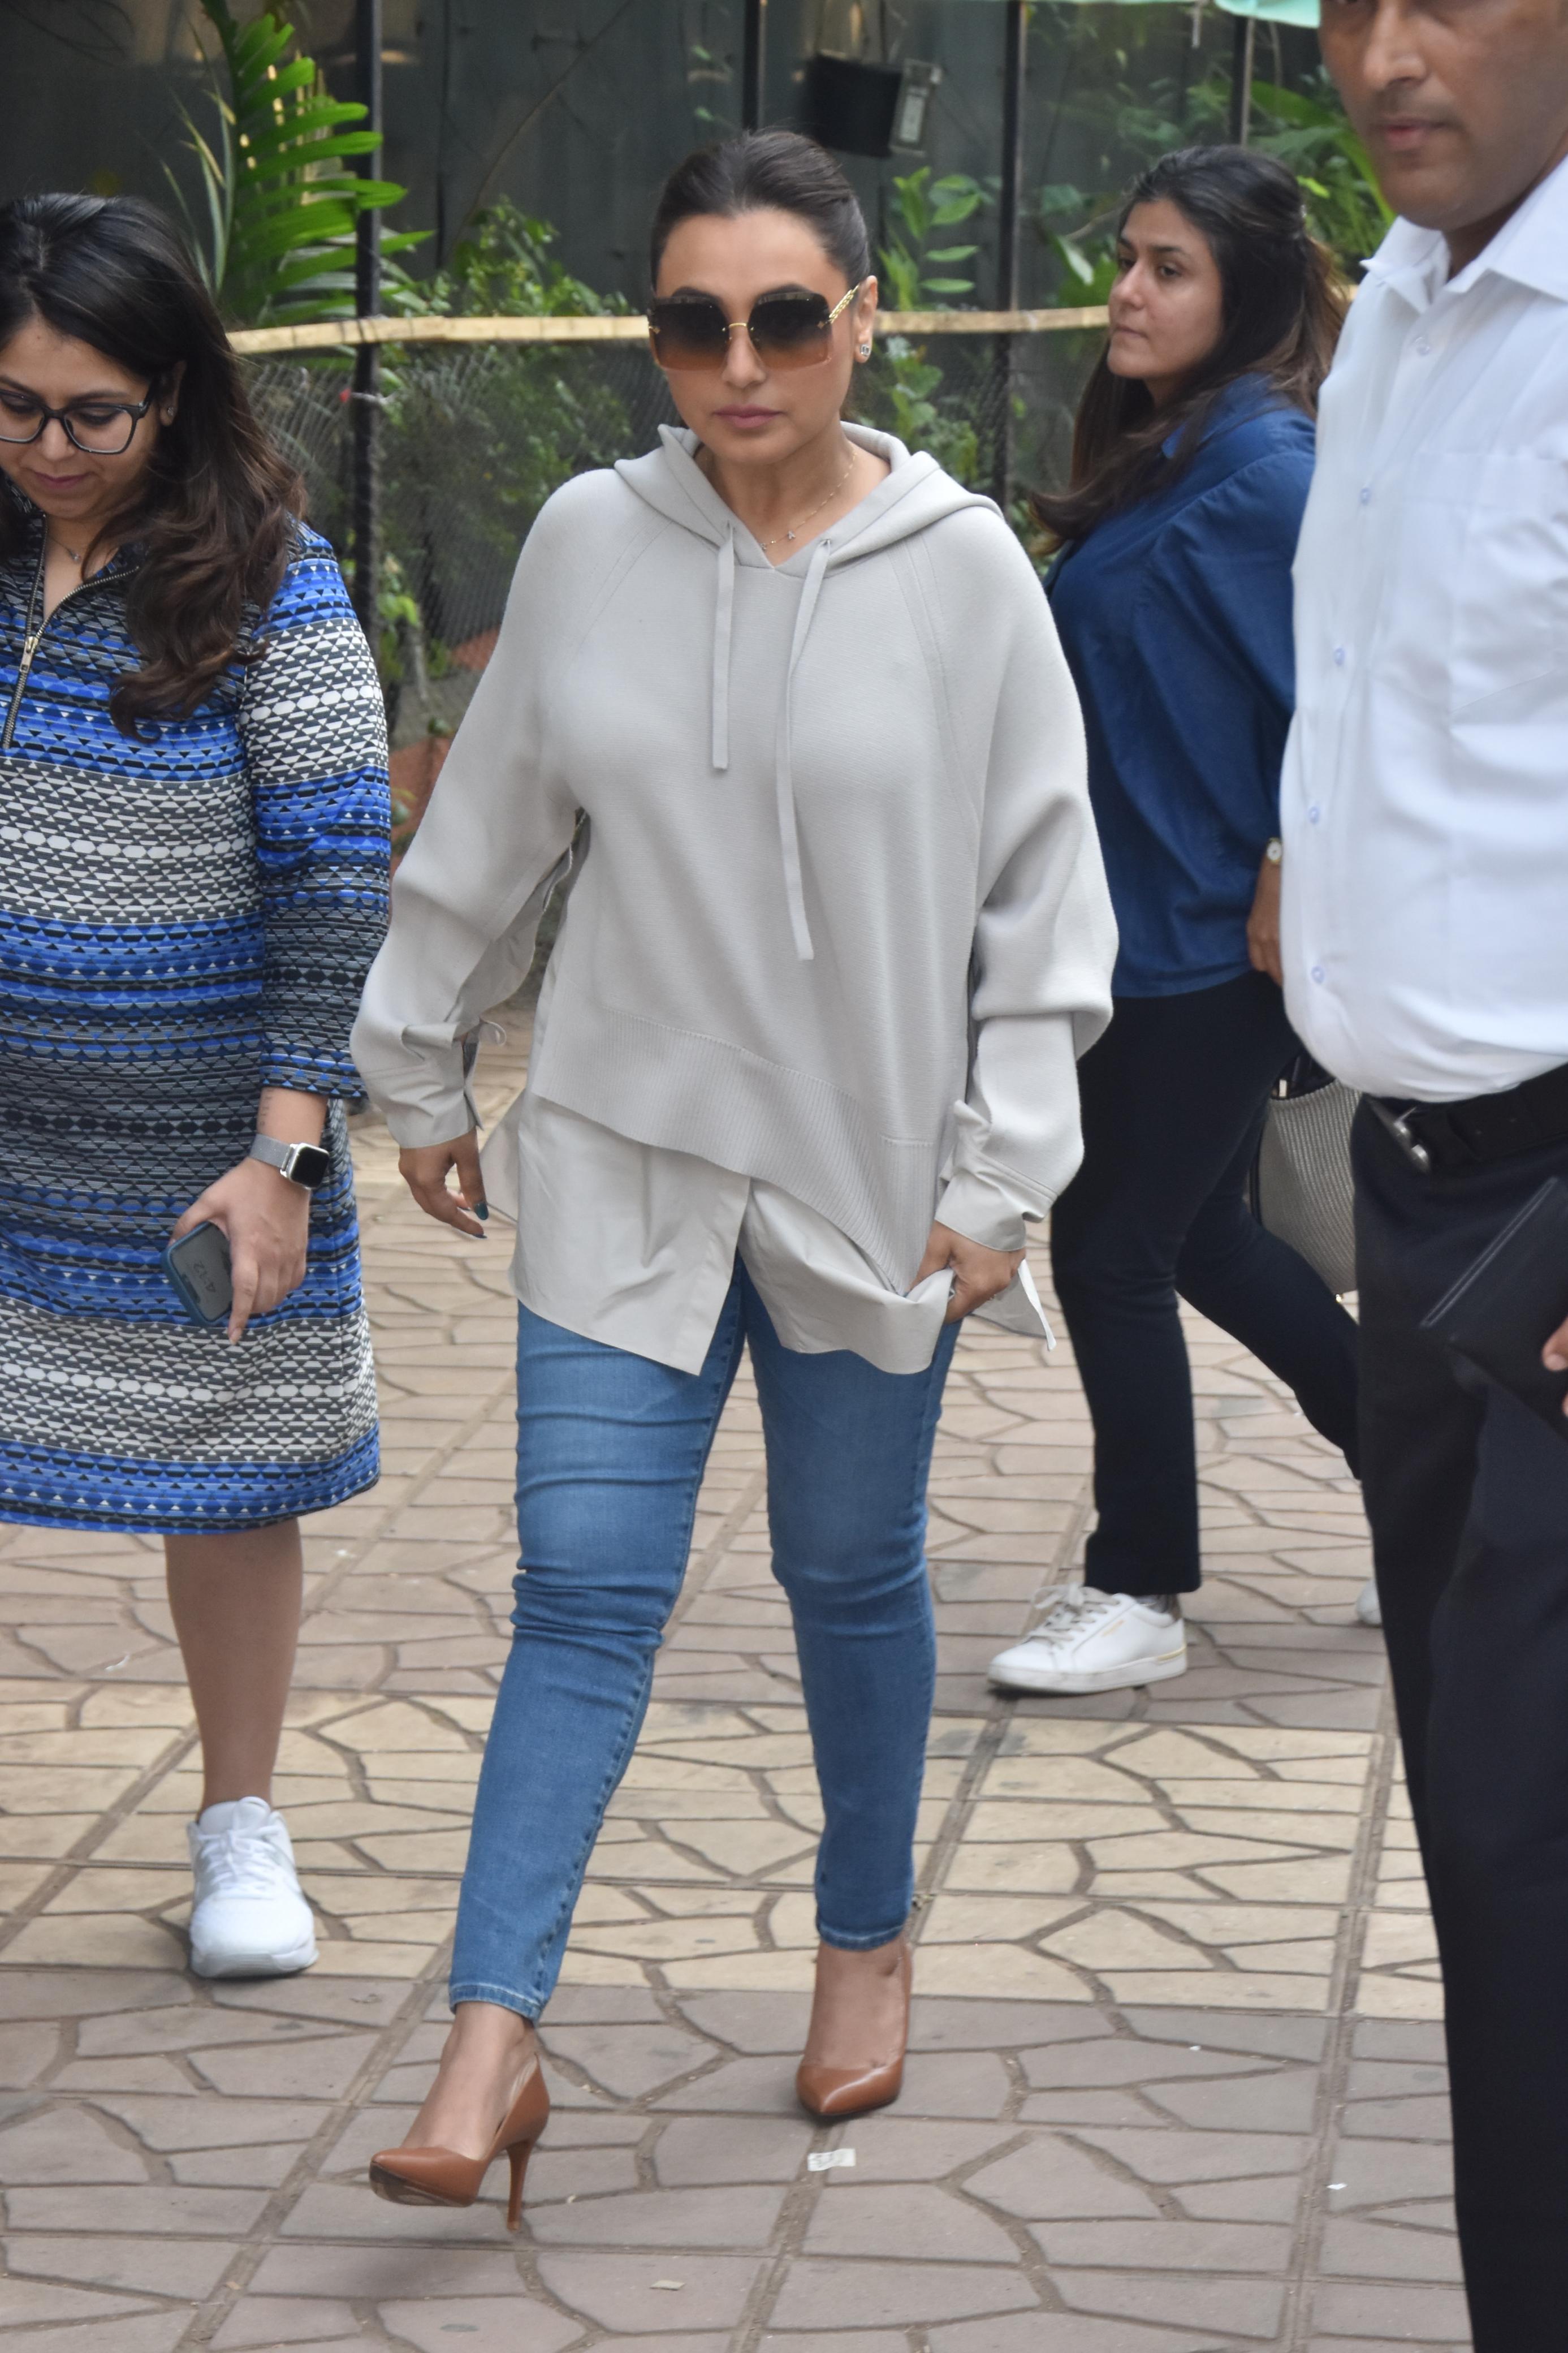 Rani Mukerji was spotted in a comfortable yet stylish look today